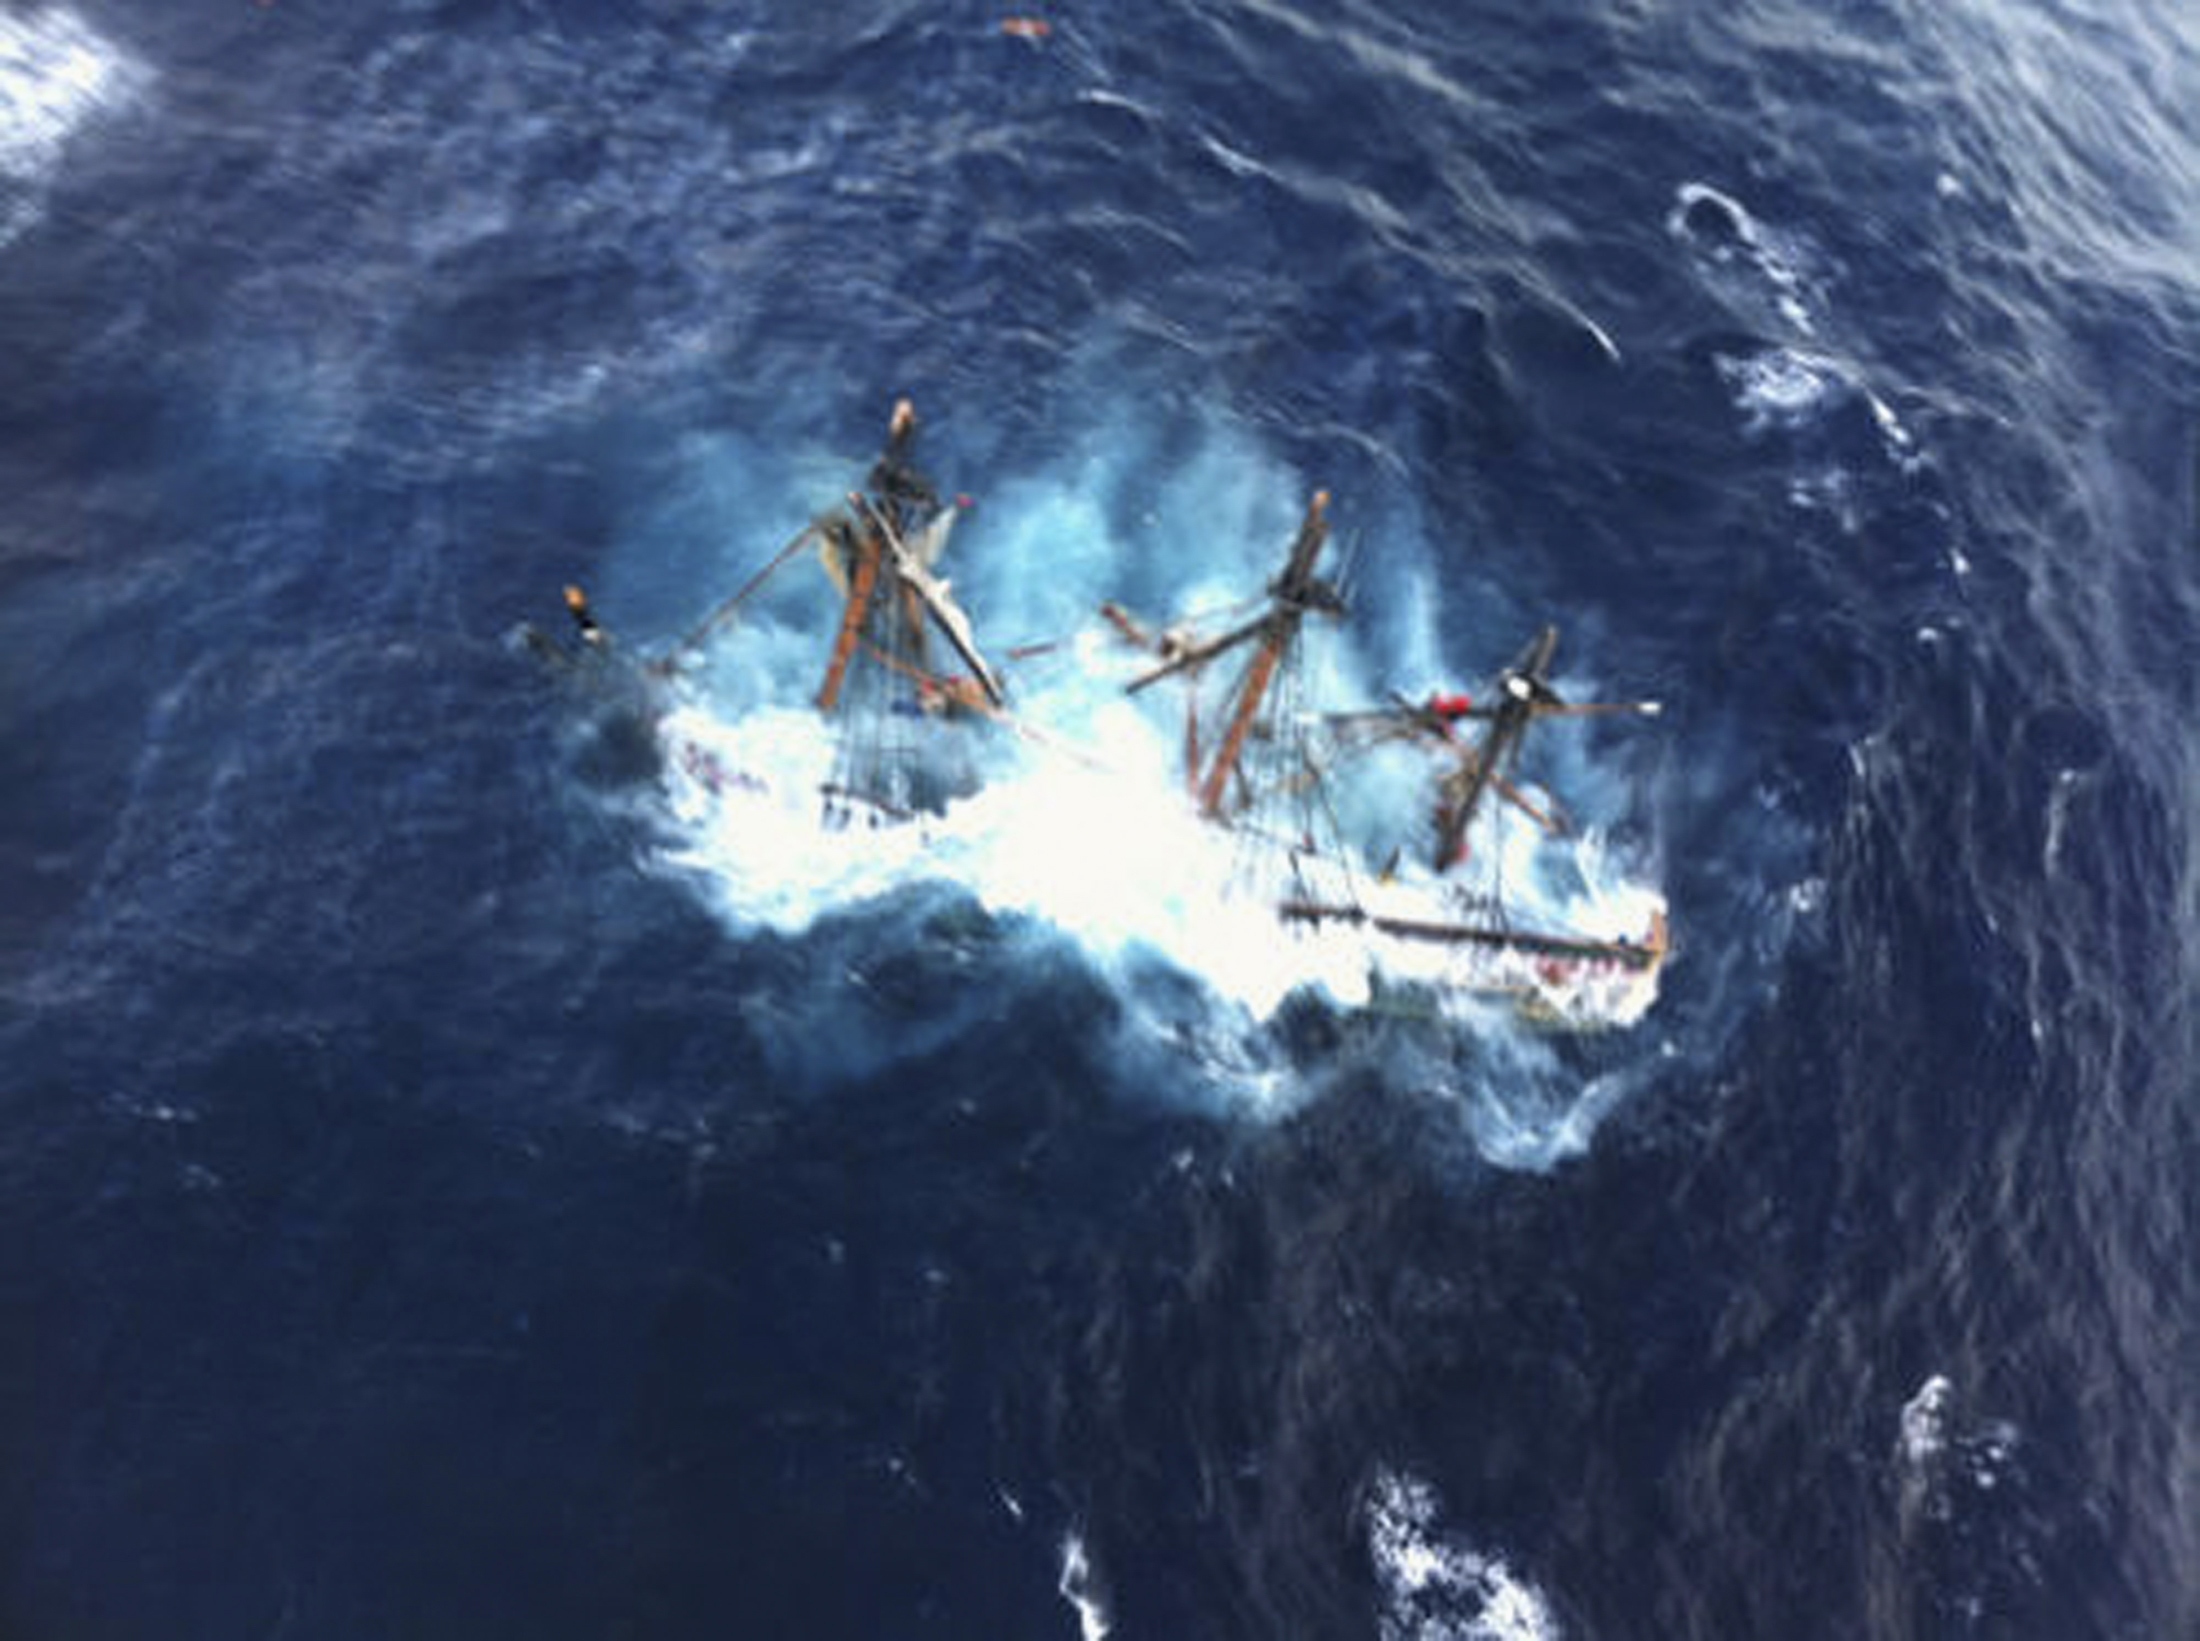 US Coast Guard photo of the 1960 Bounty replica sinking during Hurricane Sandy in the Atlantic Ocean about 90 miles SE of Hatteras, North Carolina, after 16 crew members abandoned the sinking ship and were rescued by helicopter. Photo taken by USCG Photo by Petty Officer 2nd Class Tim Kuklewski on October 29, 2012.